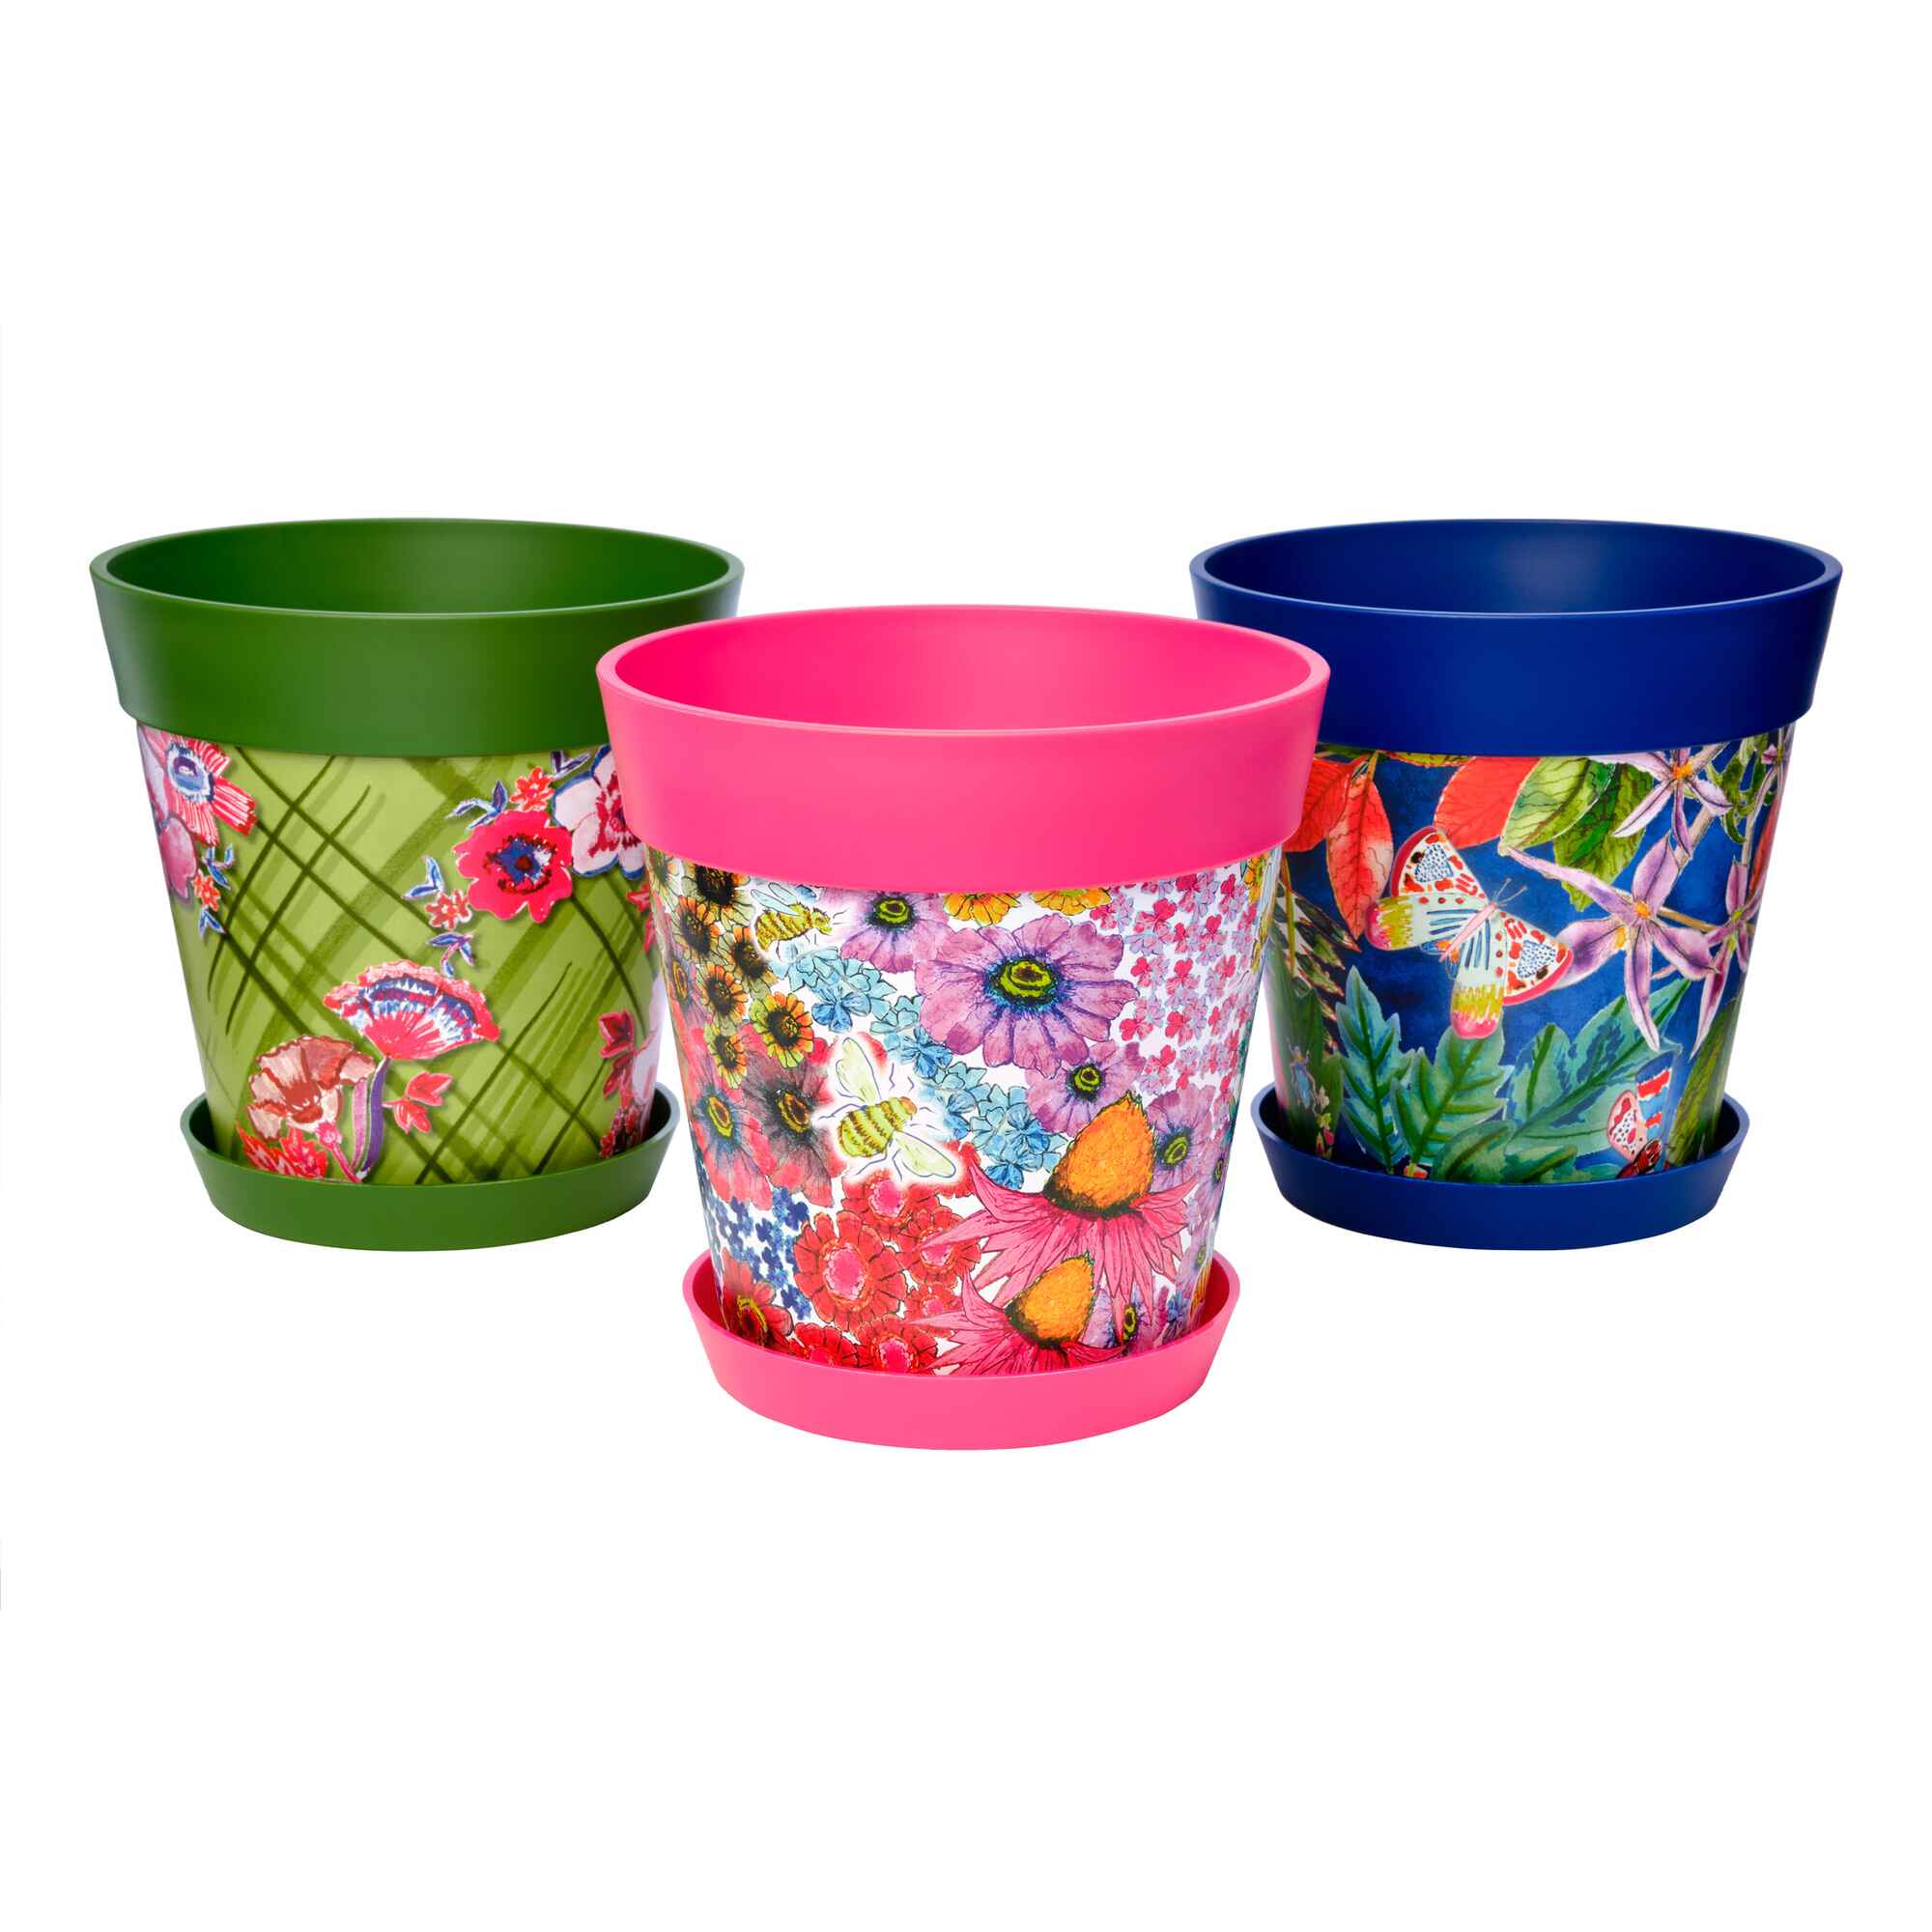 Picture of 3 Medium 22cm Plastic Multi Colour Floral Pattern Indoor/Outdoor Flowerpots with Saucers 